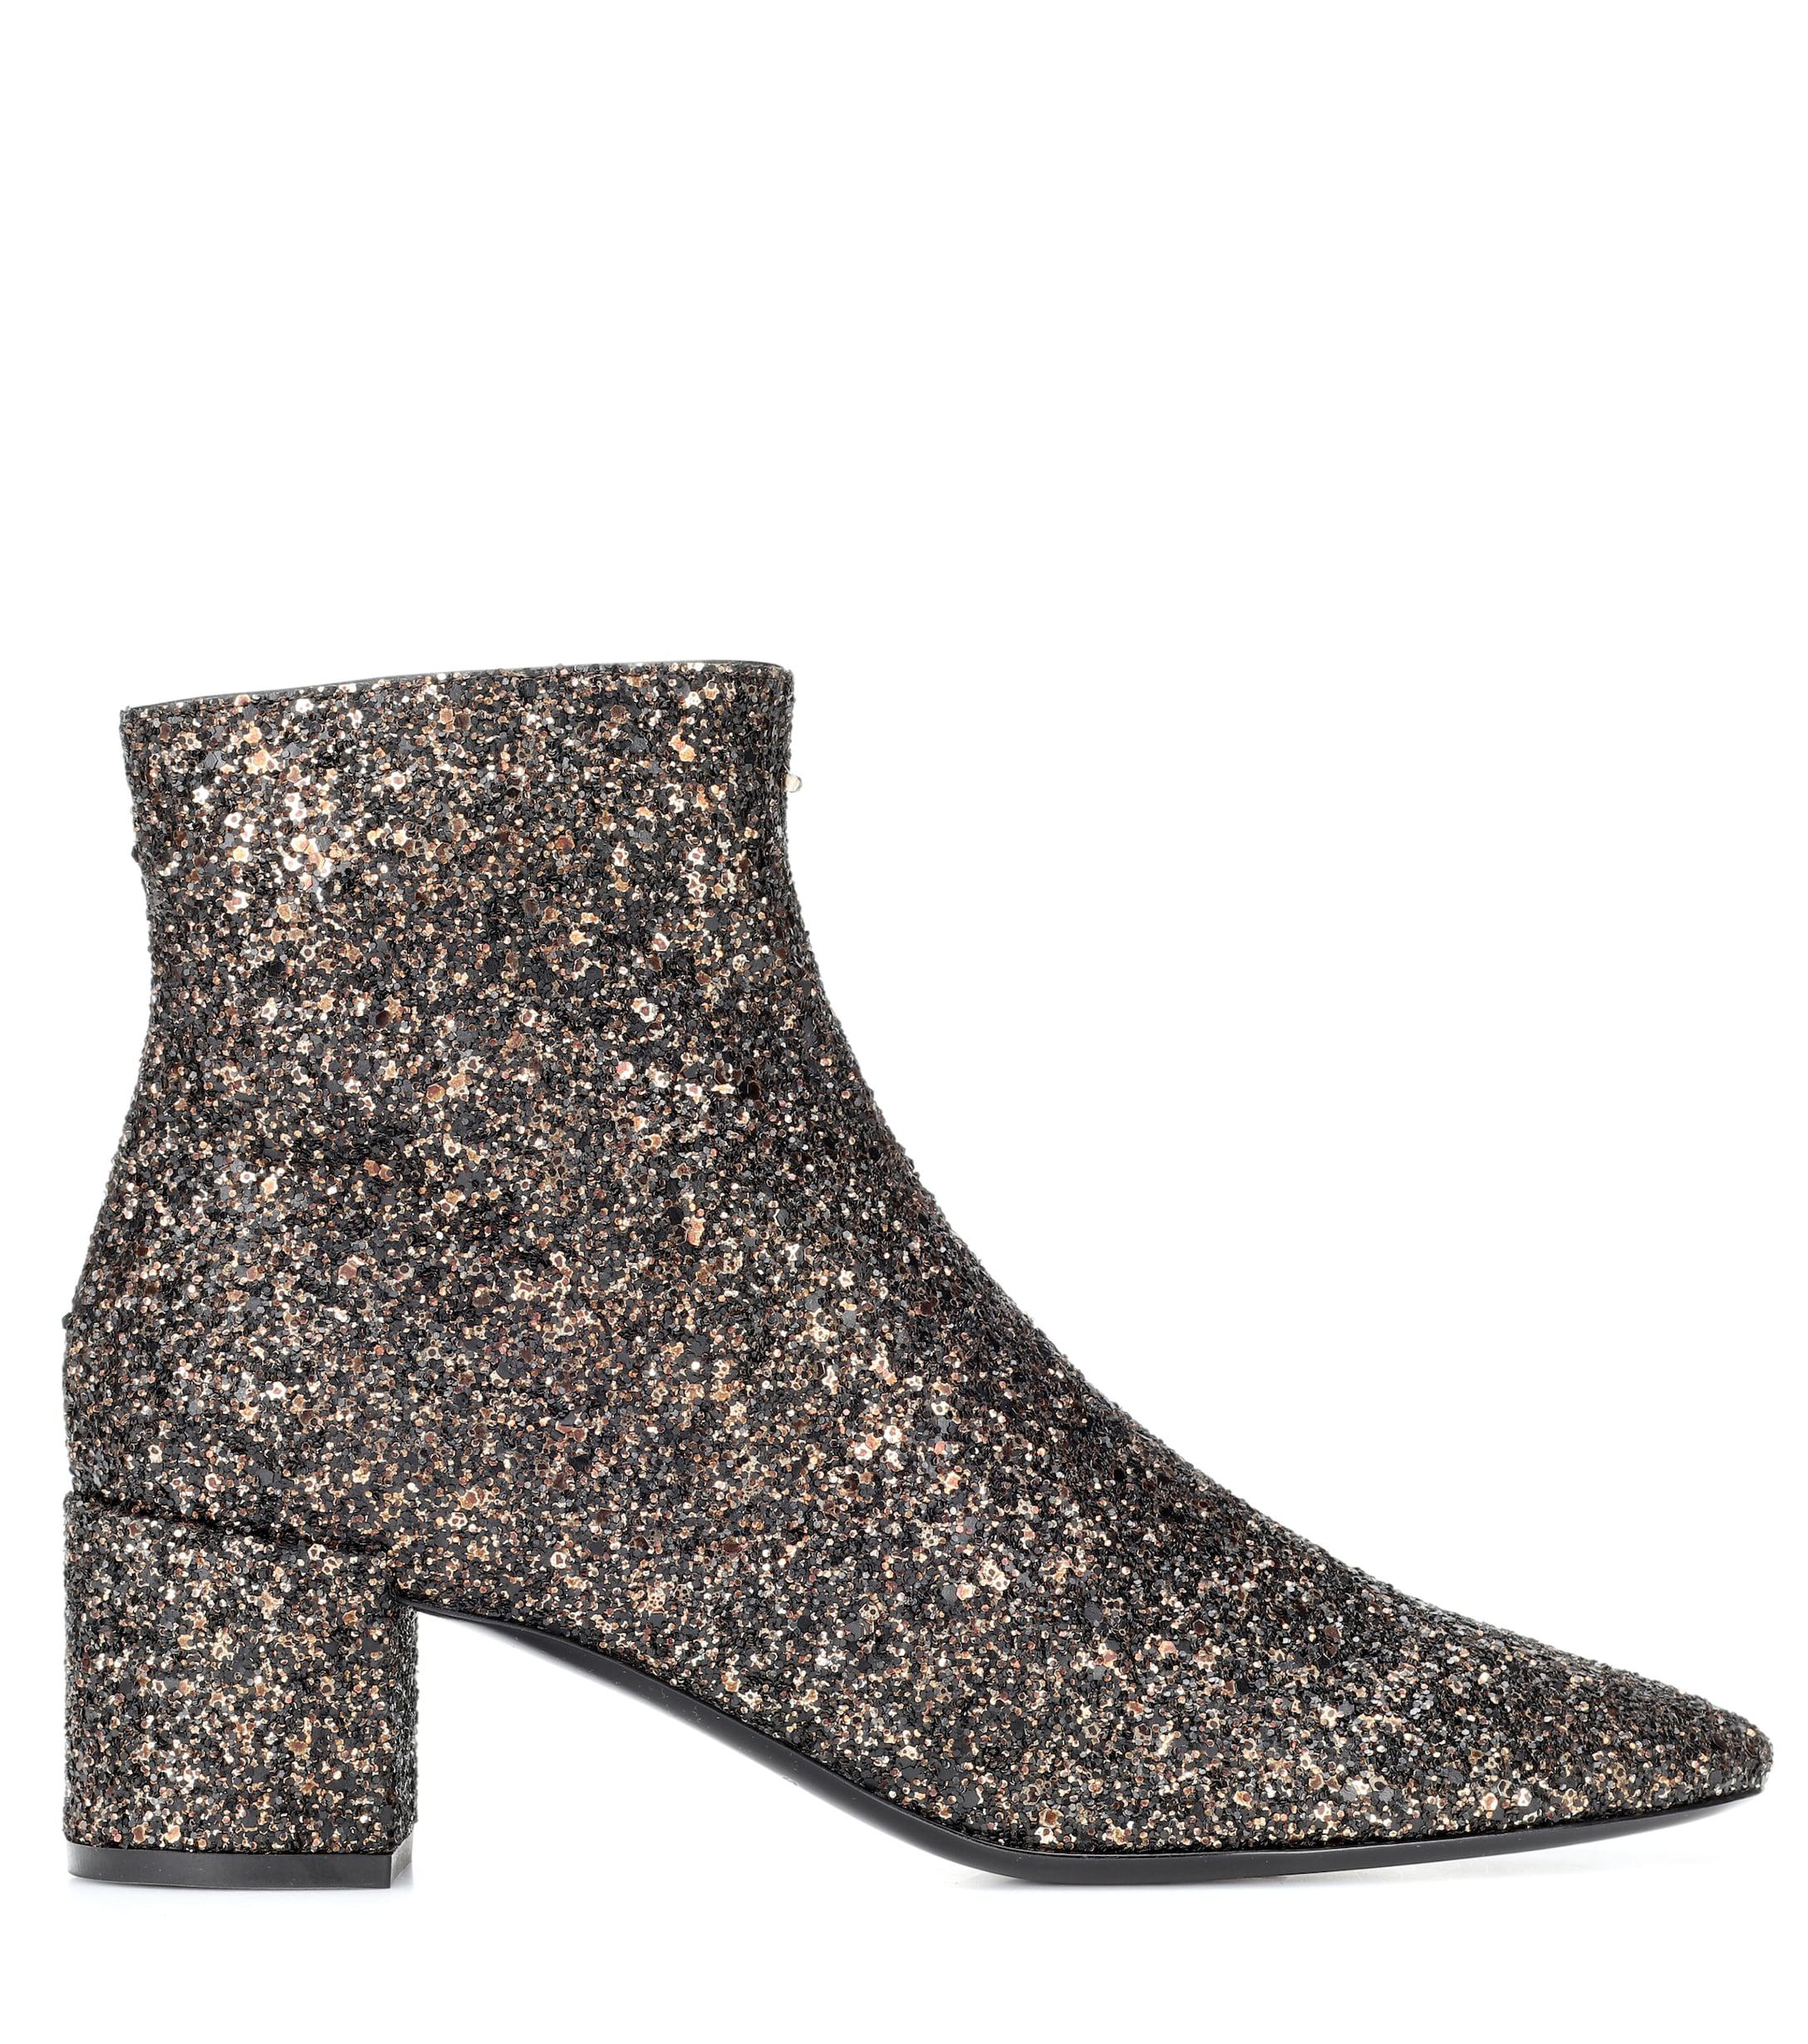 Saint Laurent Leather Loulou 50 Glitter Ankle Boots in Gold (Metallic ...